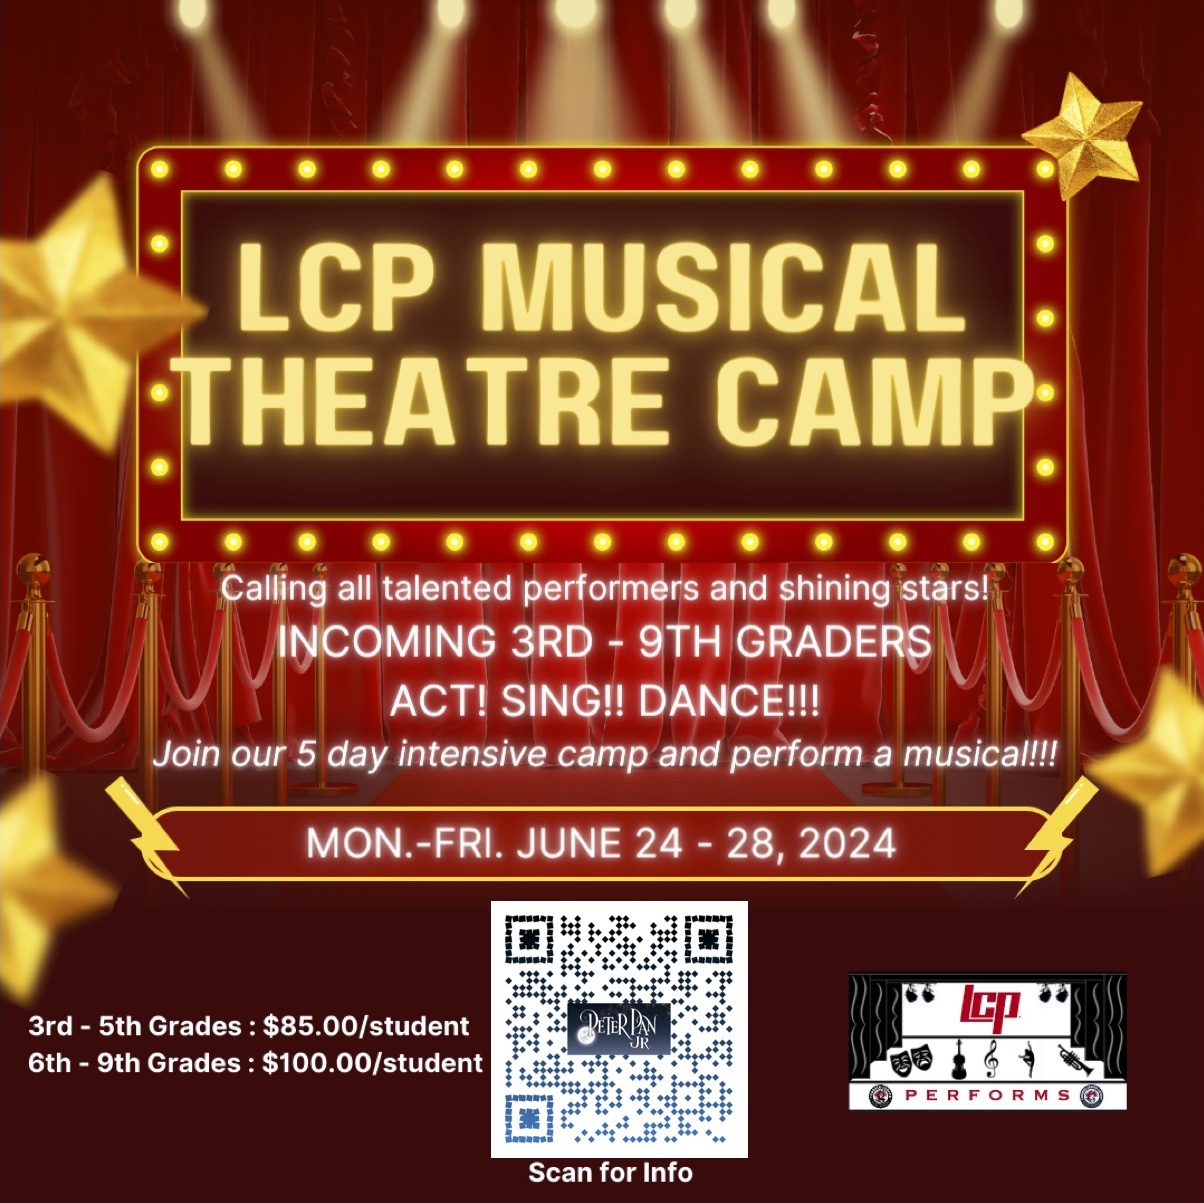 LCP Musical Theatre Camp 2024